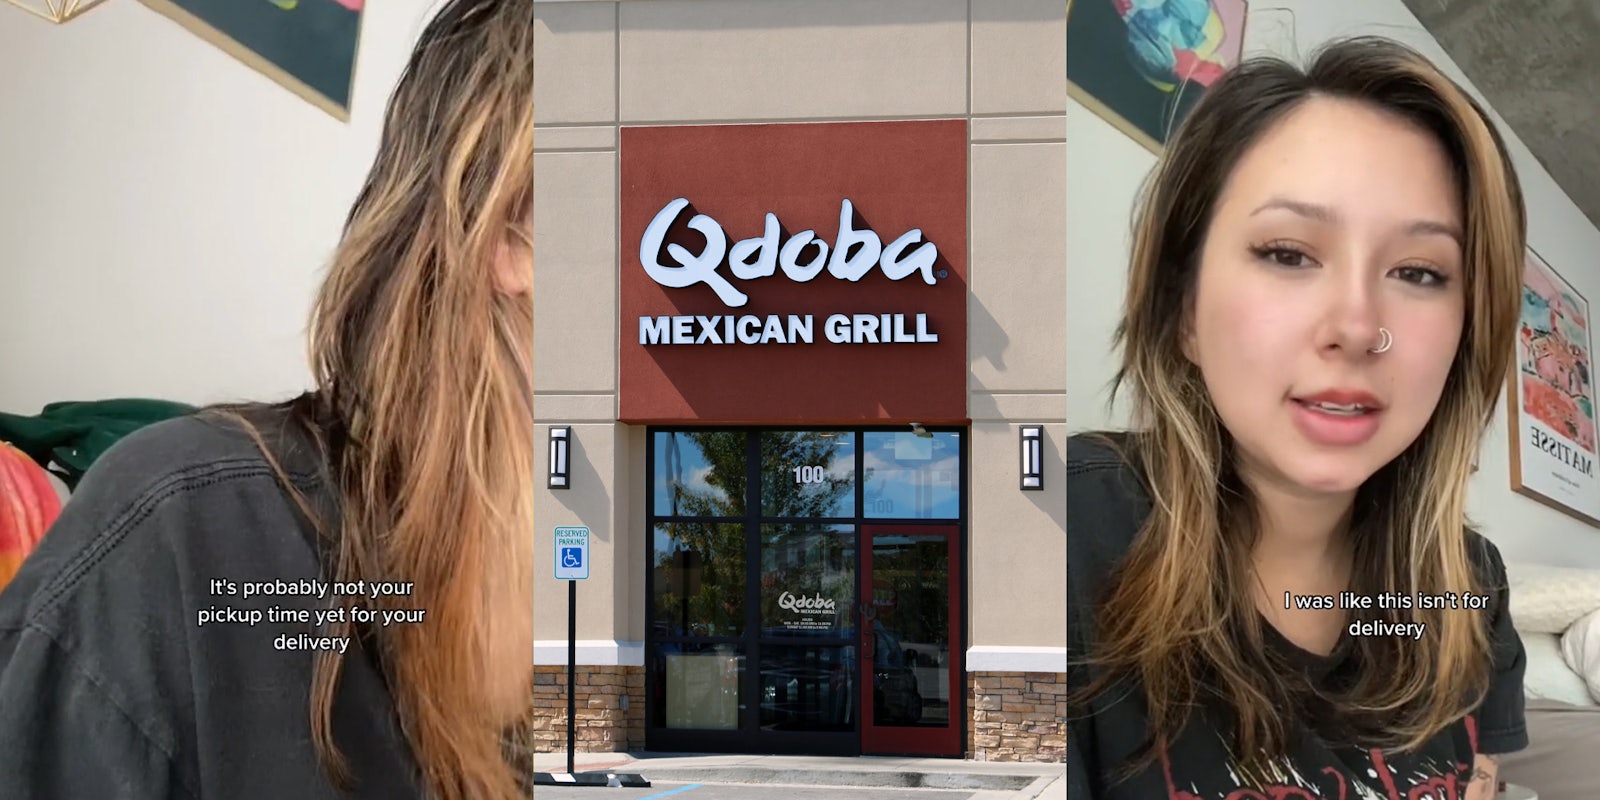 woman speaking caption 'It's probably not your pickup time yet sorry for your delivery' (l) Qdoba sign on building above door (c) woman speaking caption 'I was like this isn't for delivery' (r)